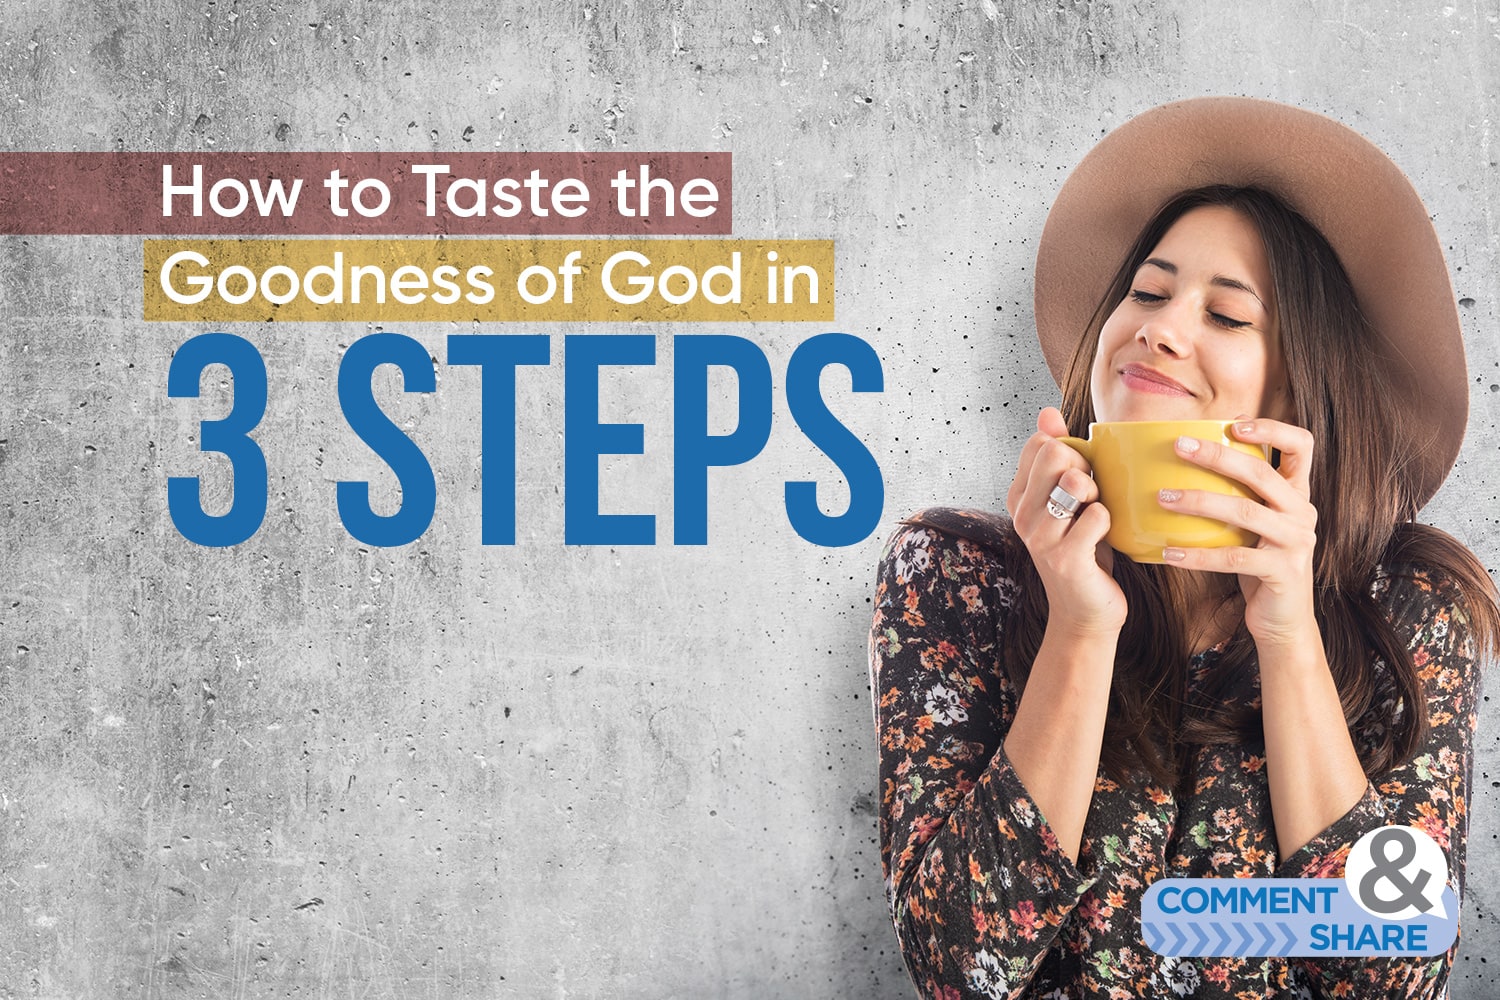 How to Taste the Goodness of God in three steps